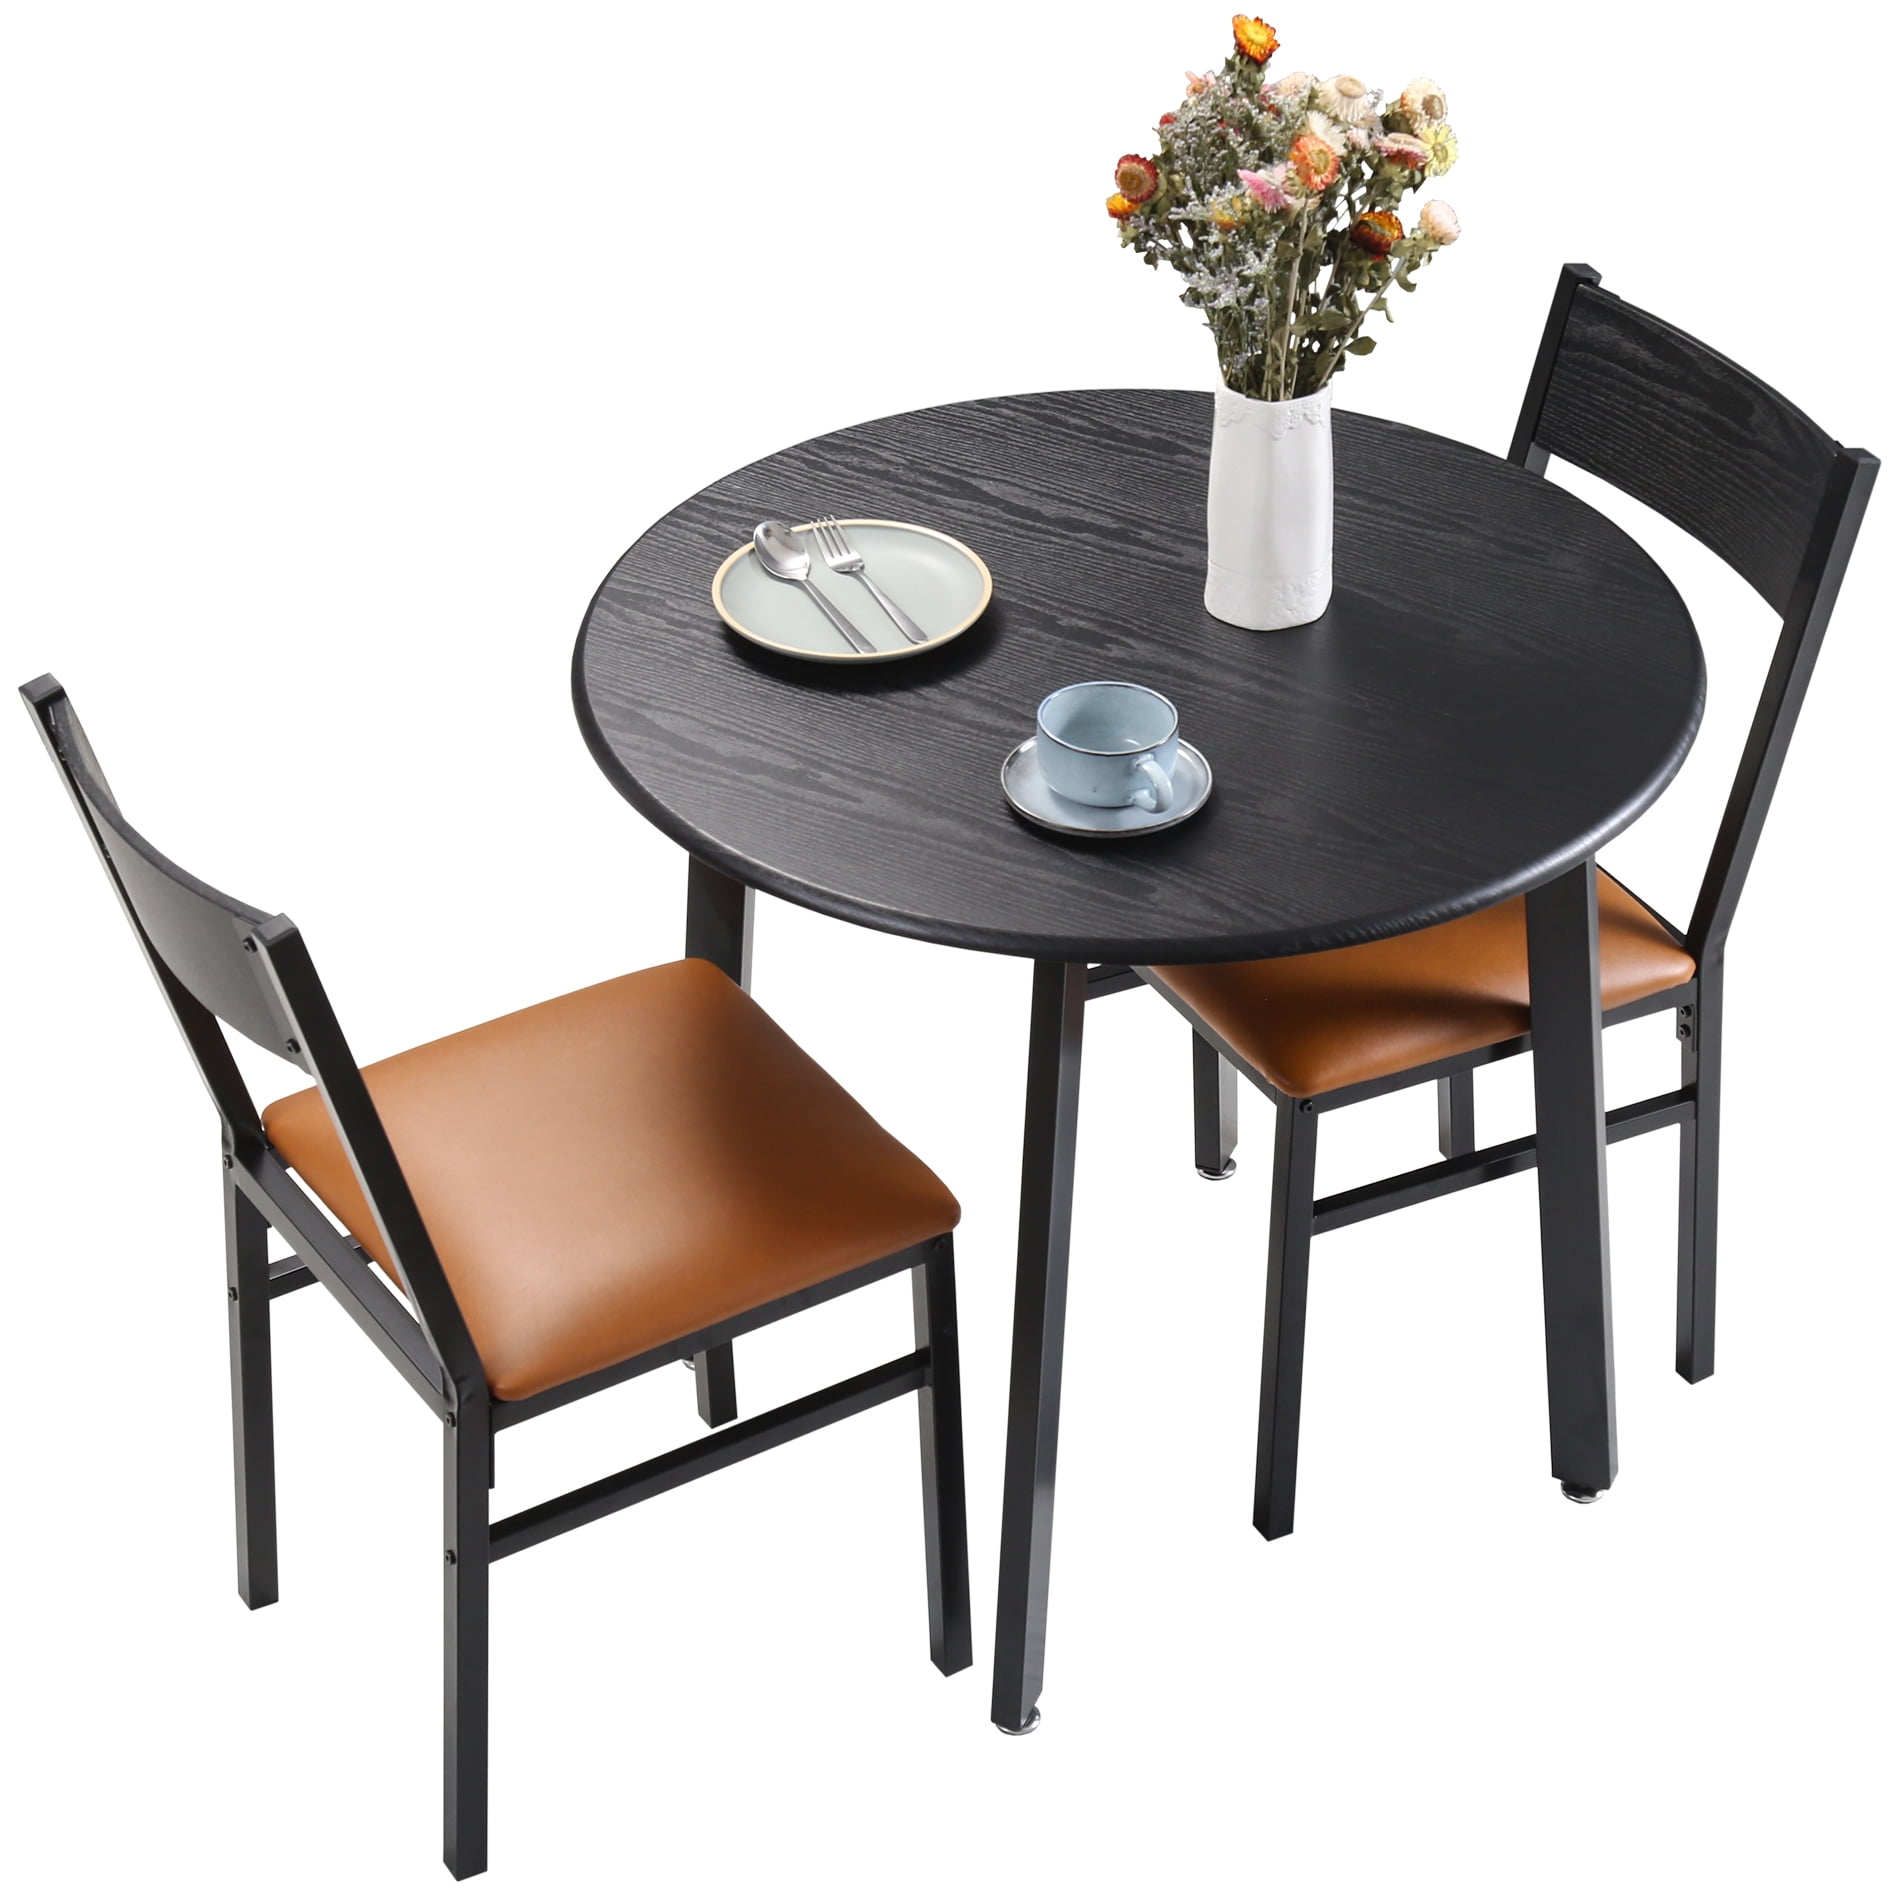 3 Piece Round Dining Table Set With, Small Kitchen Round Table And Chairs